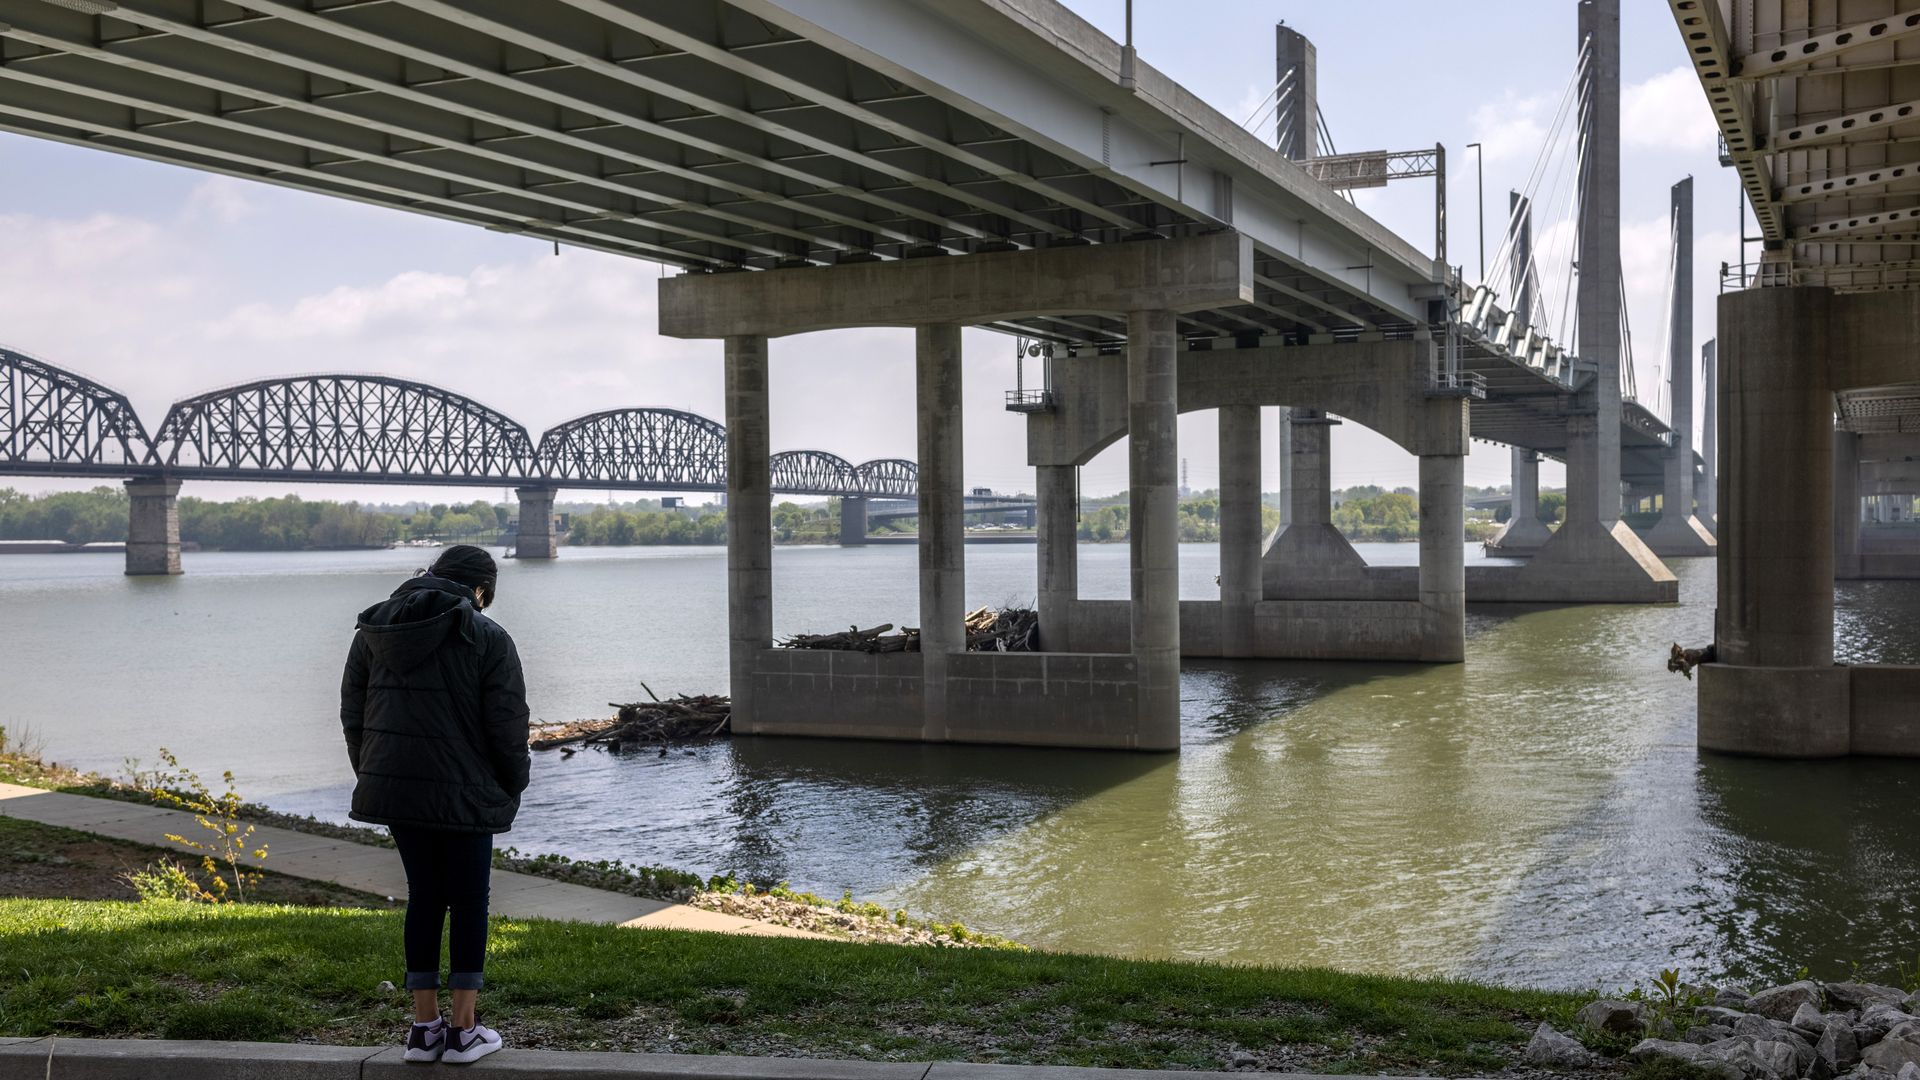 A migrant child sent on to live with relatives after her mother was expelled under Title 42 is seen next to the Ohio River.